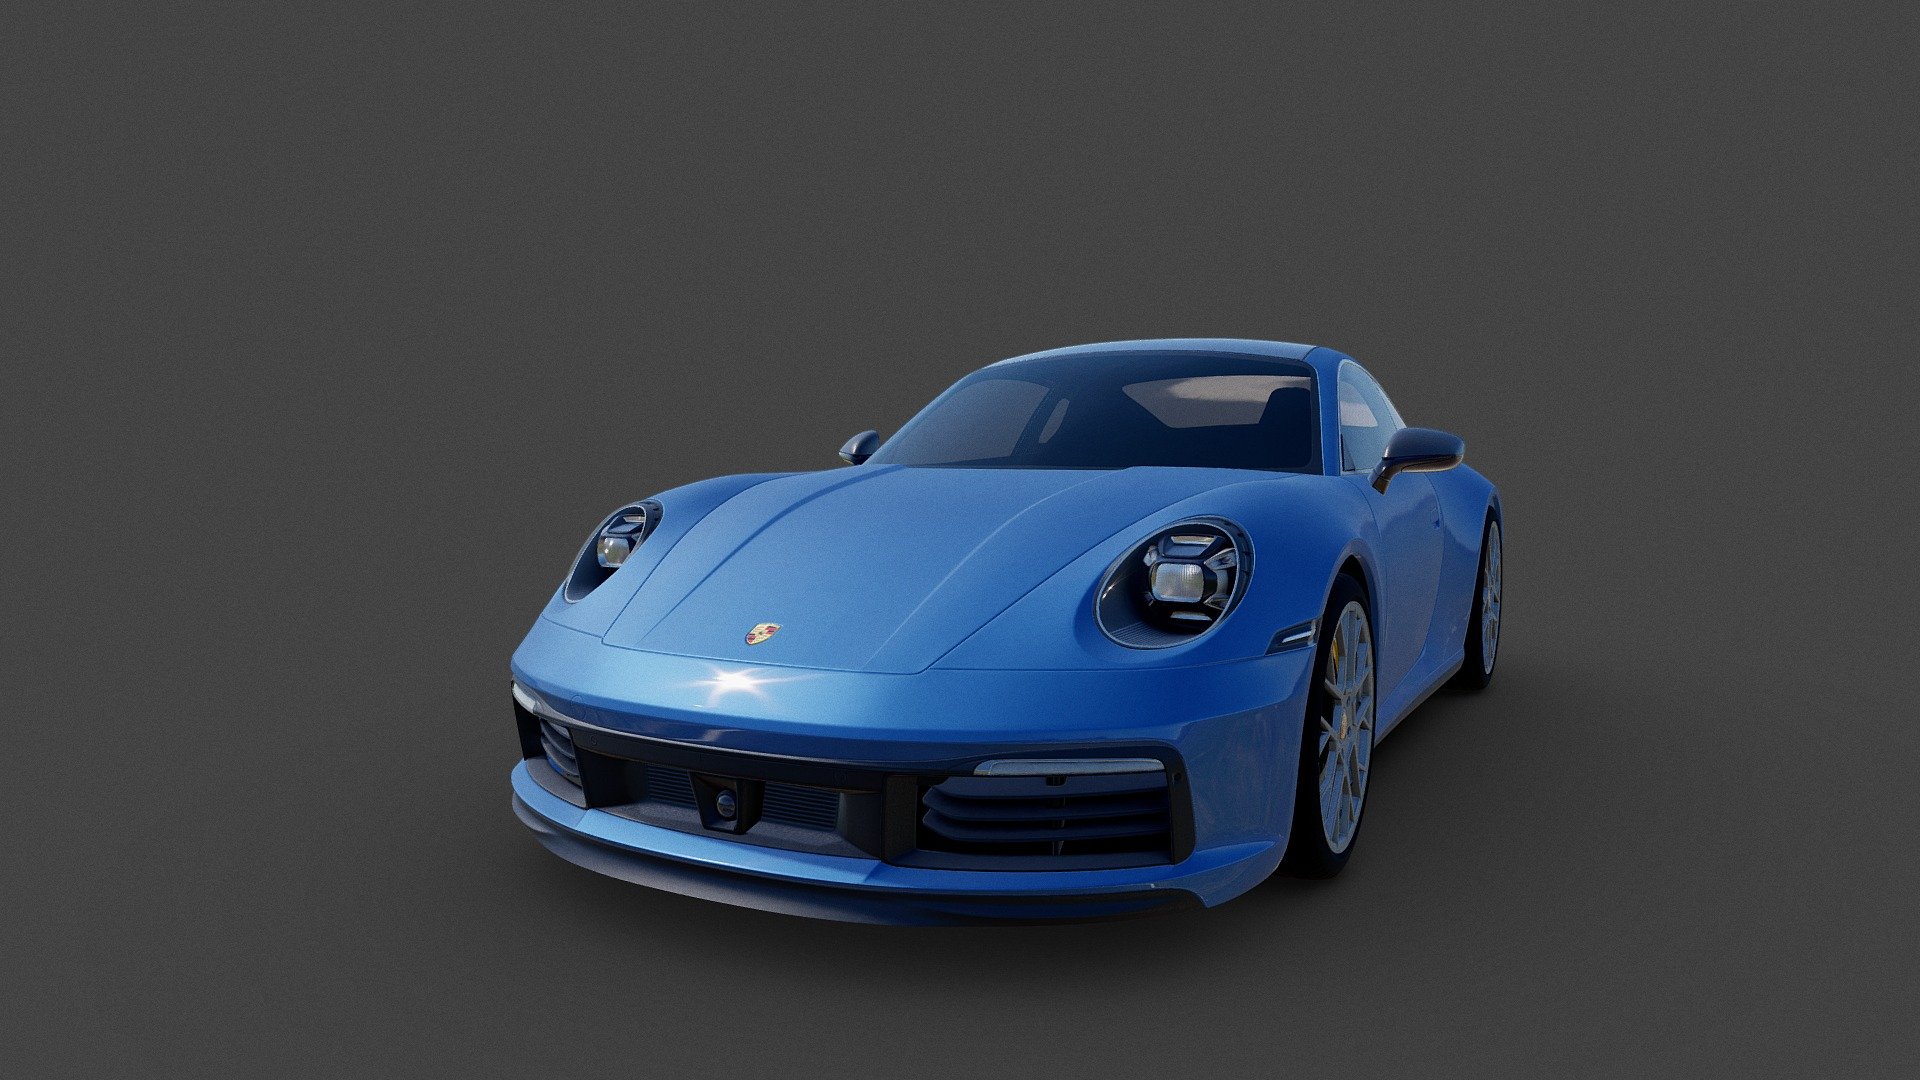 This took a LONG time, I even restarted the project from scratch, but its finally done, hope its good. 
Please leave a like and follow!!! - porsche 911 2020 - 3D model by WillisChiejina 3d model